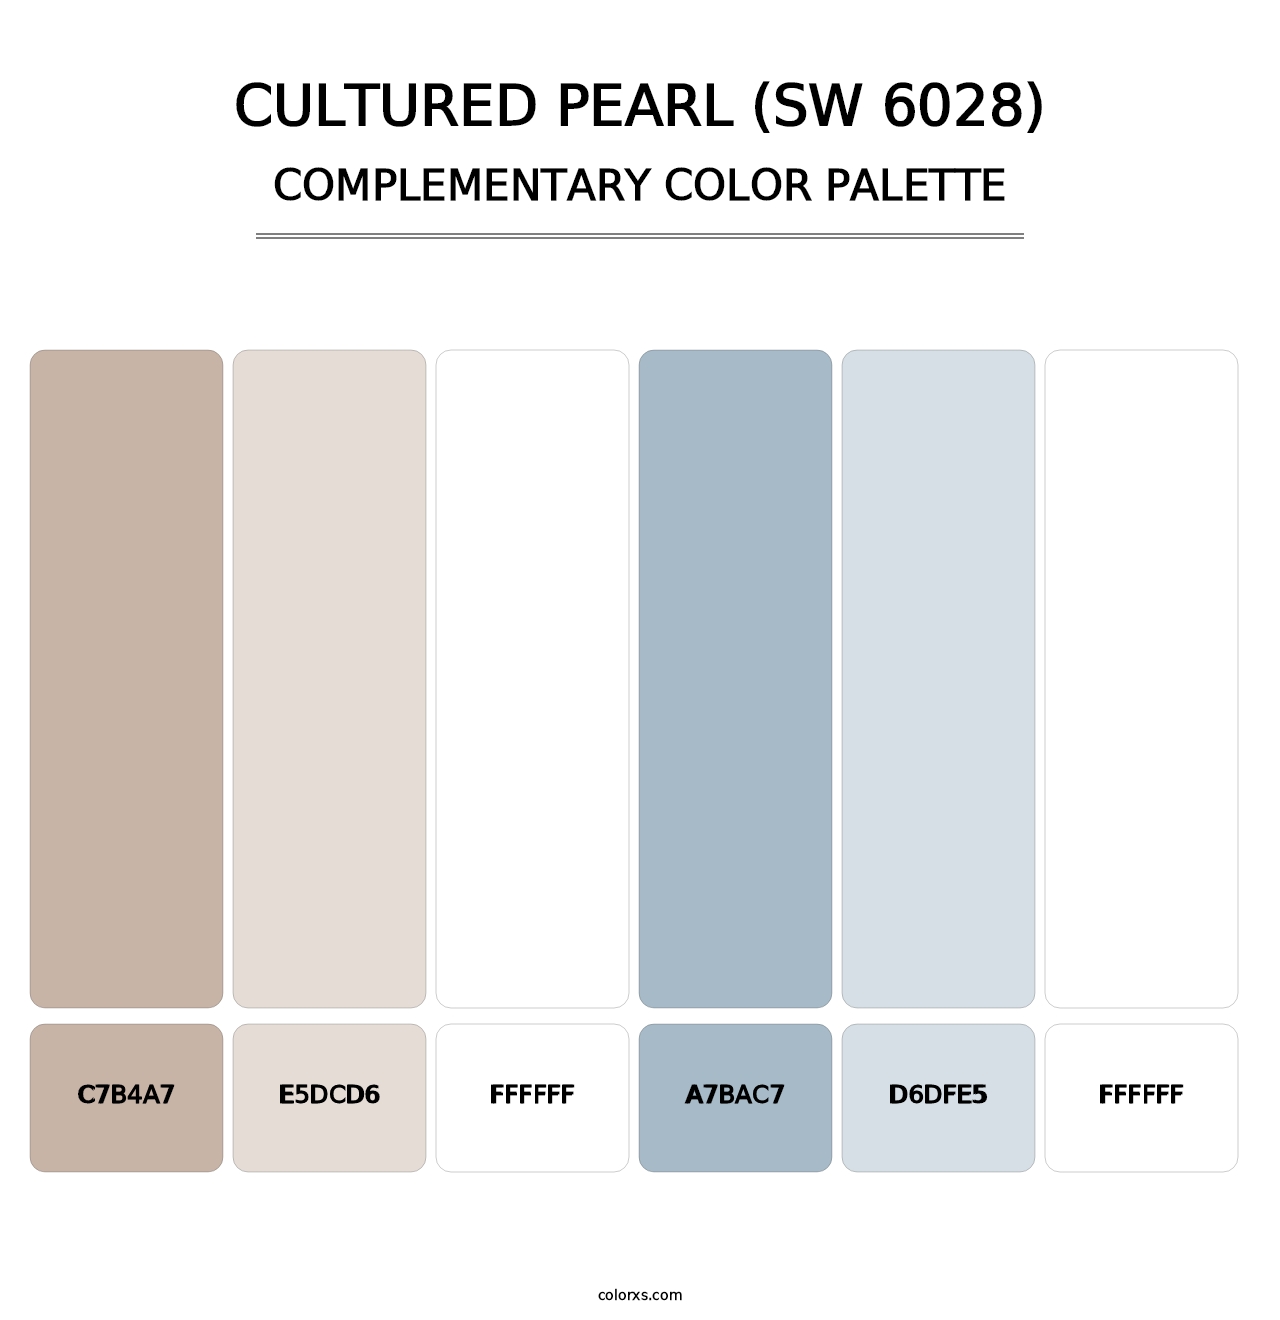 Cultured Pearl (SW 6028) - Complementary Color Palette